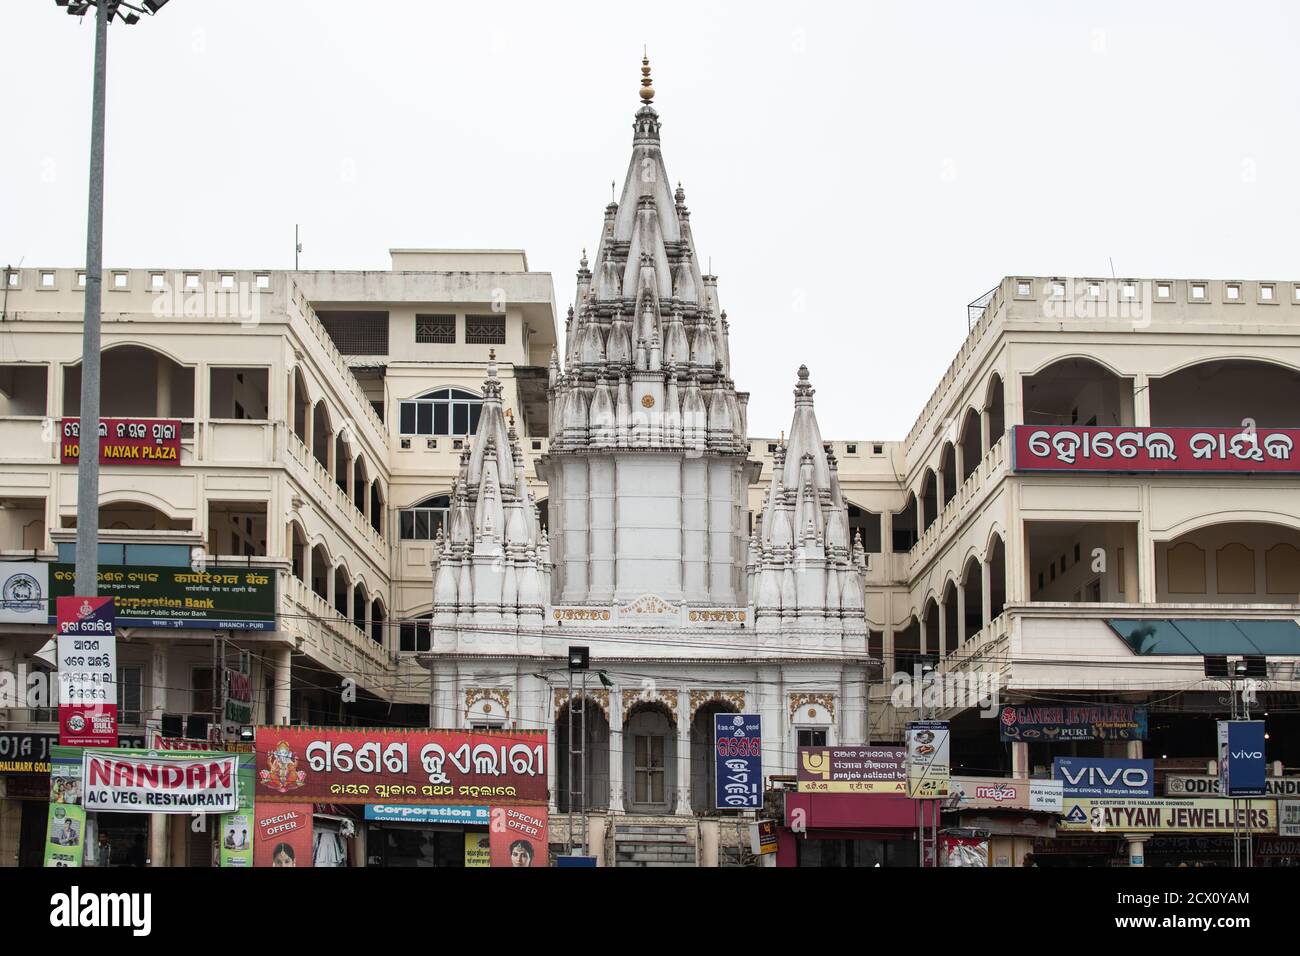 Puri, India - February 3, 2020: Street view of a small white hindu temple close to Jagannath on February 3, 2020 in Puri, India Stock Photo